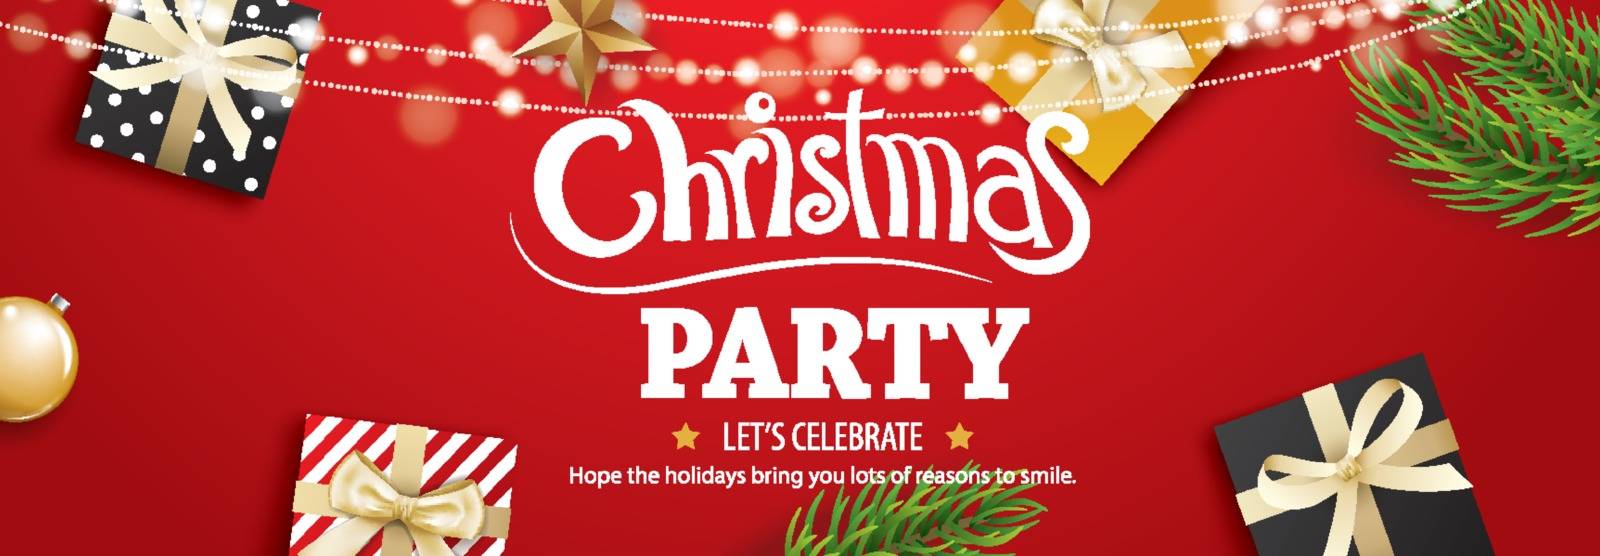 Invitation merry christmas party poster banner and card design t by kaisorn